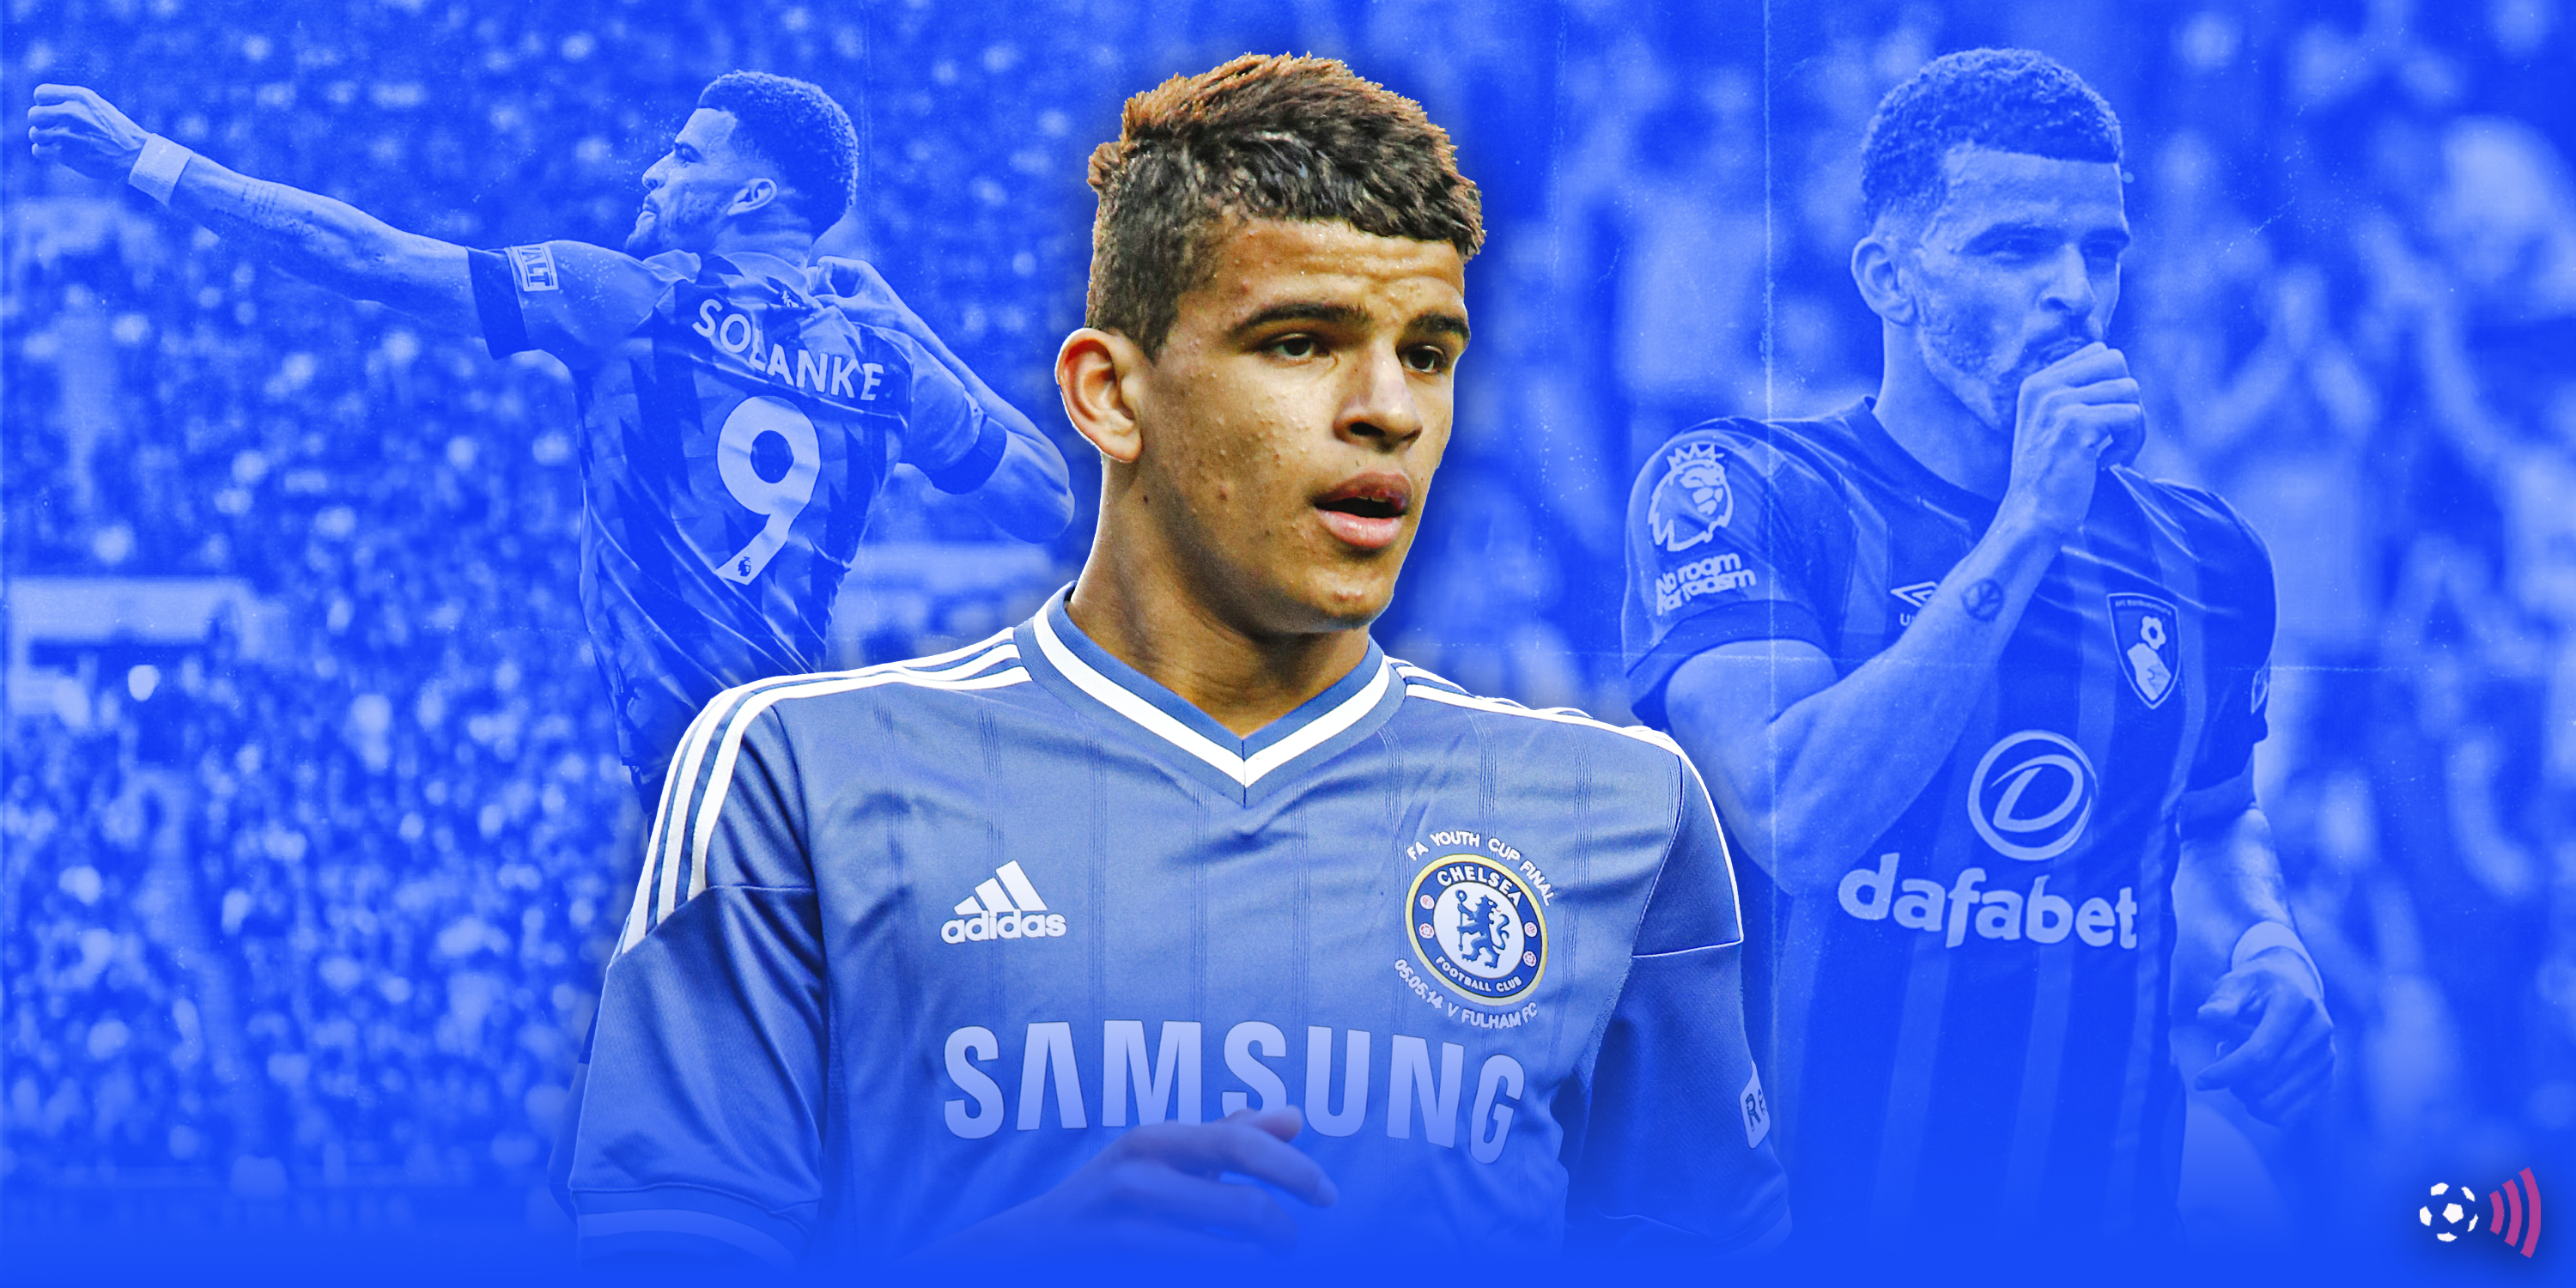 chelsea must rue selling star whose value has risen by 900% after leaving